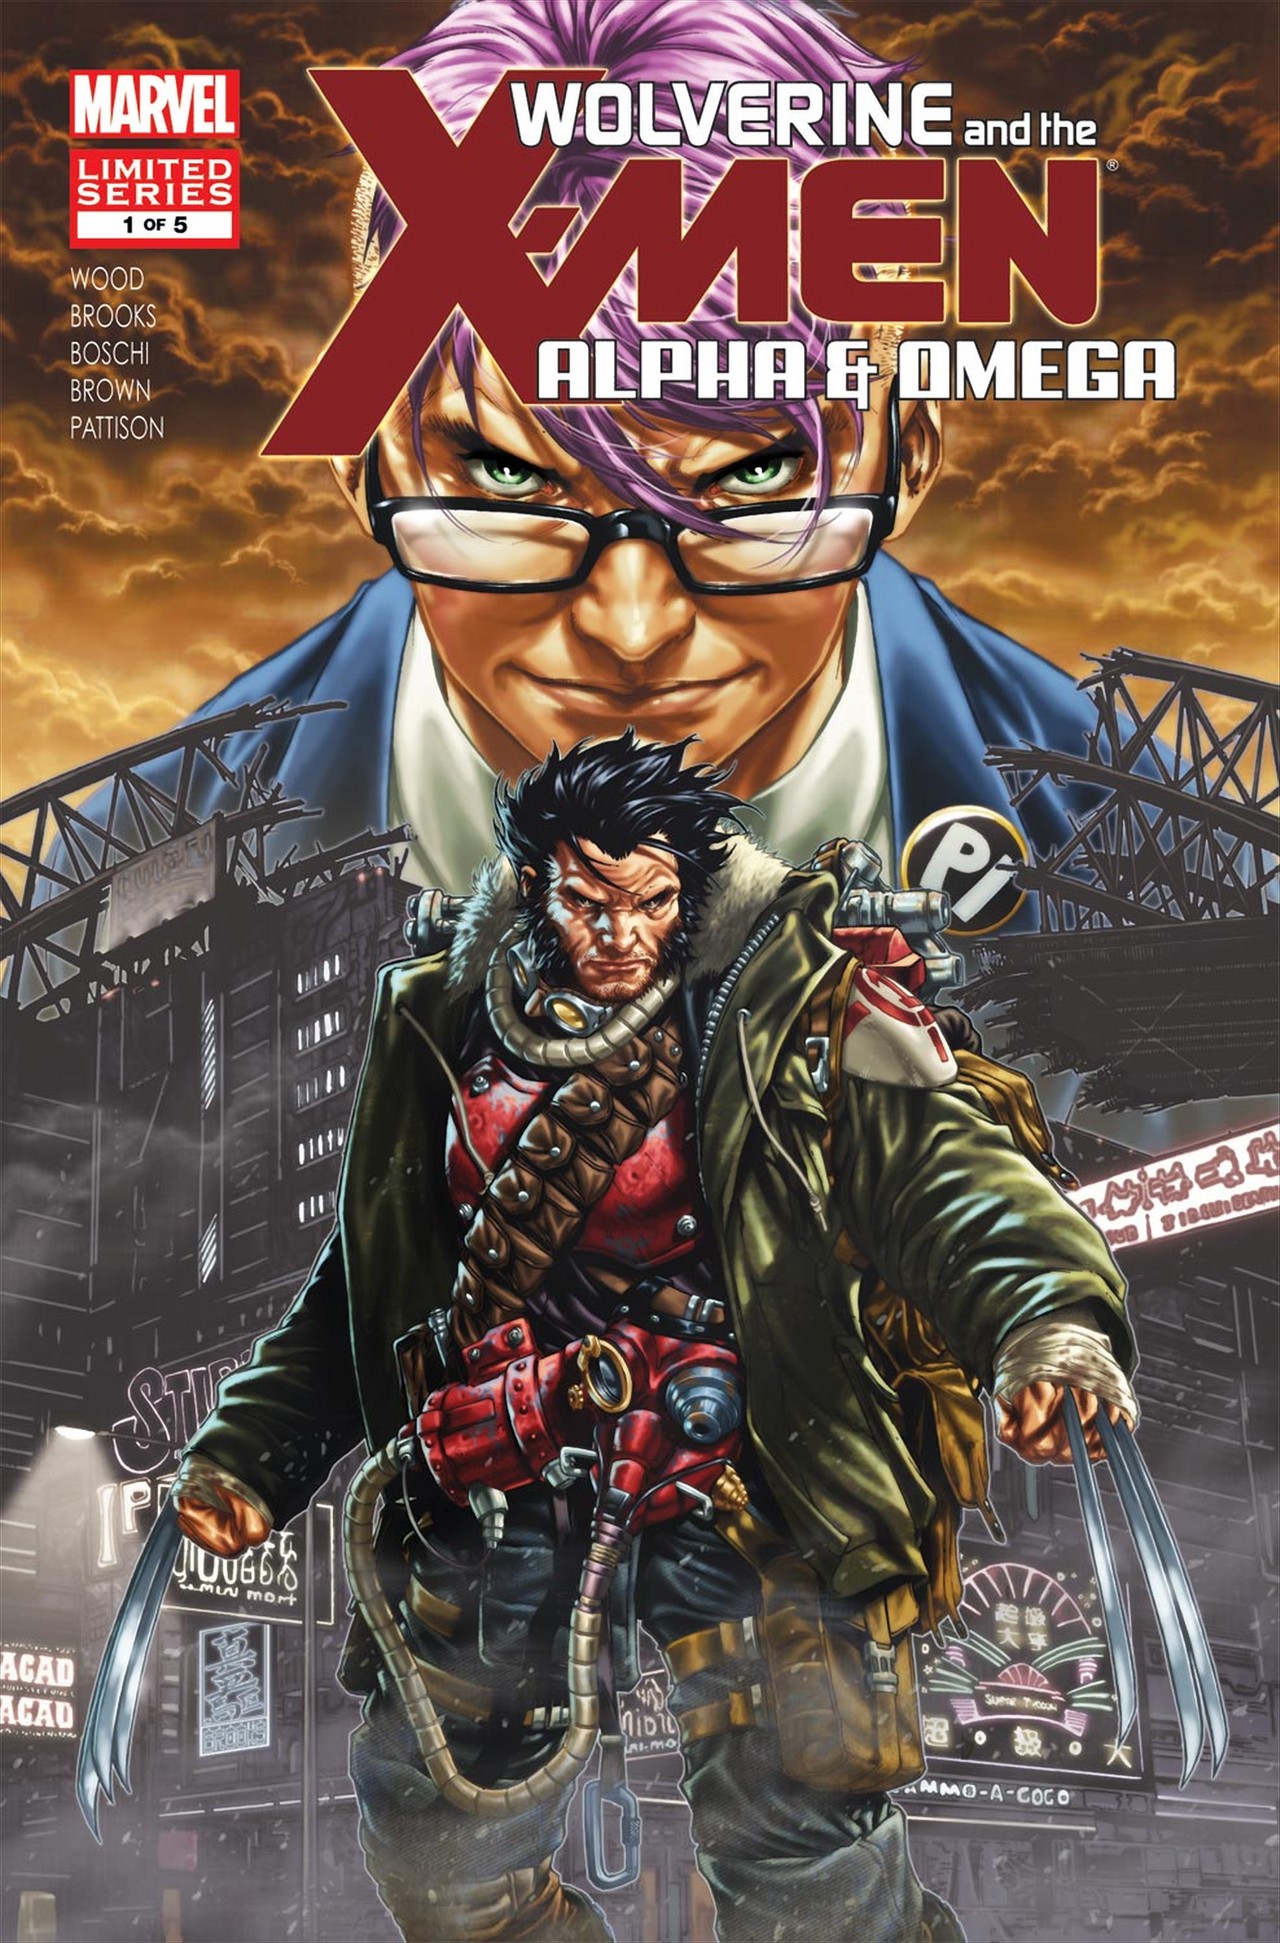 Wolverine and the X-Men Alpha & Omega 01